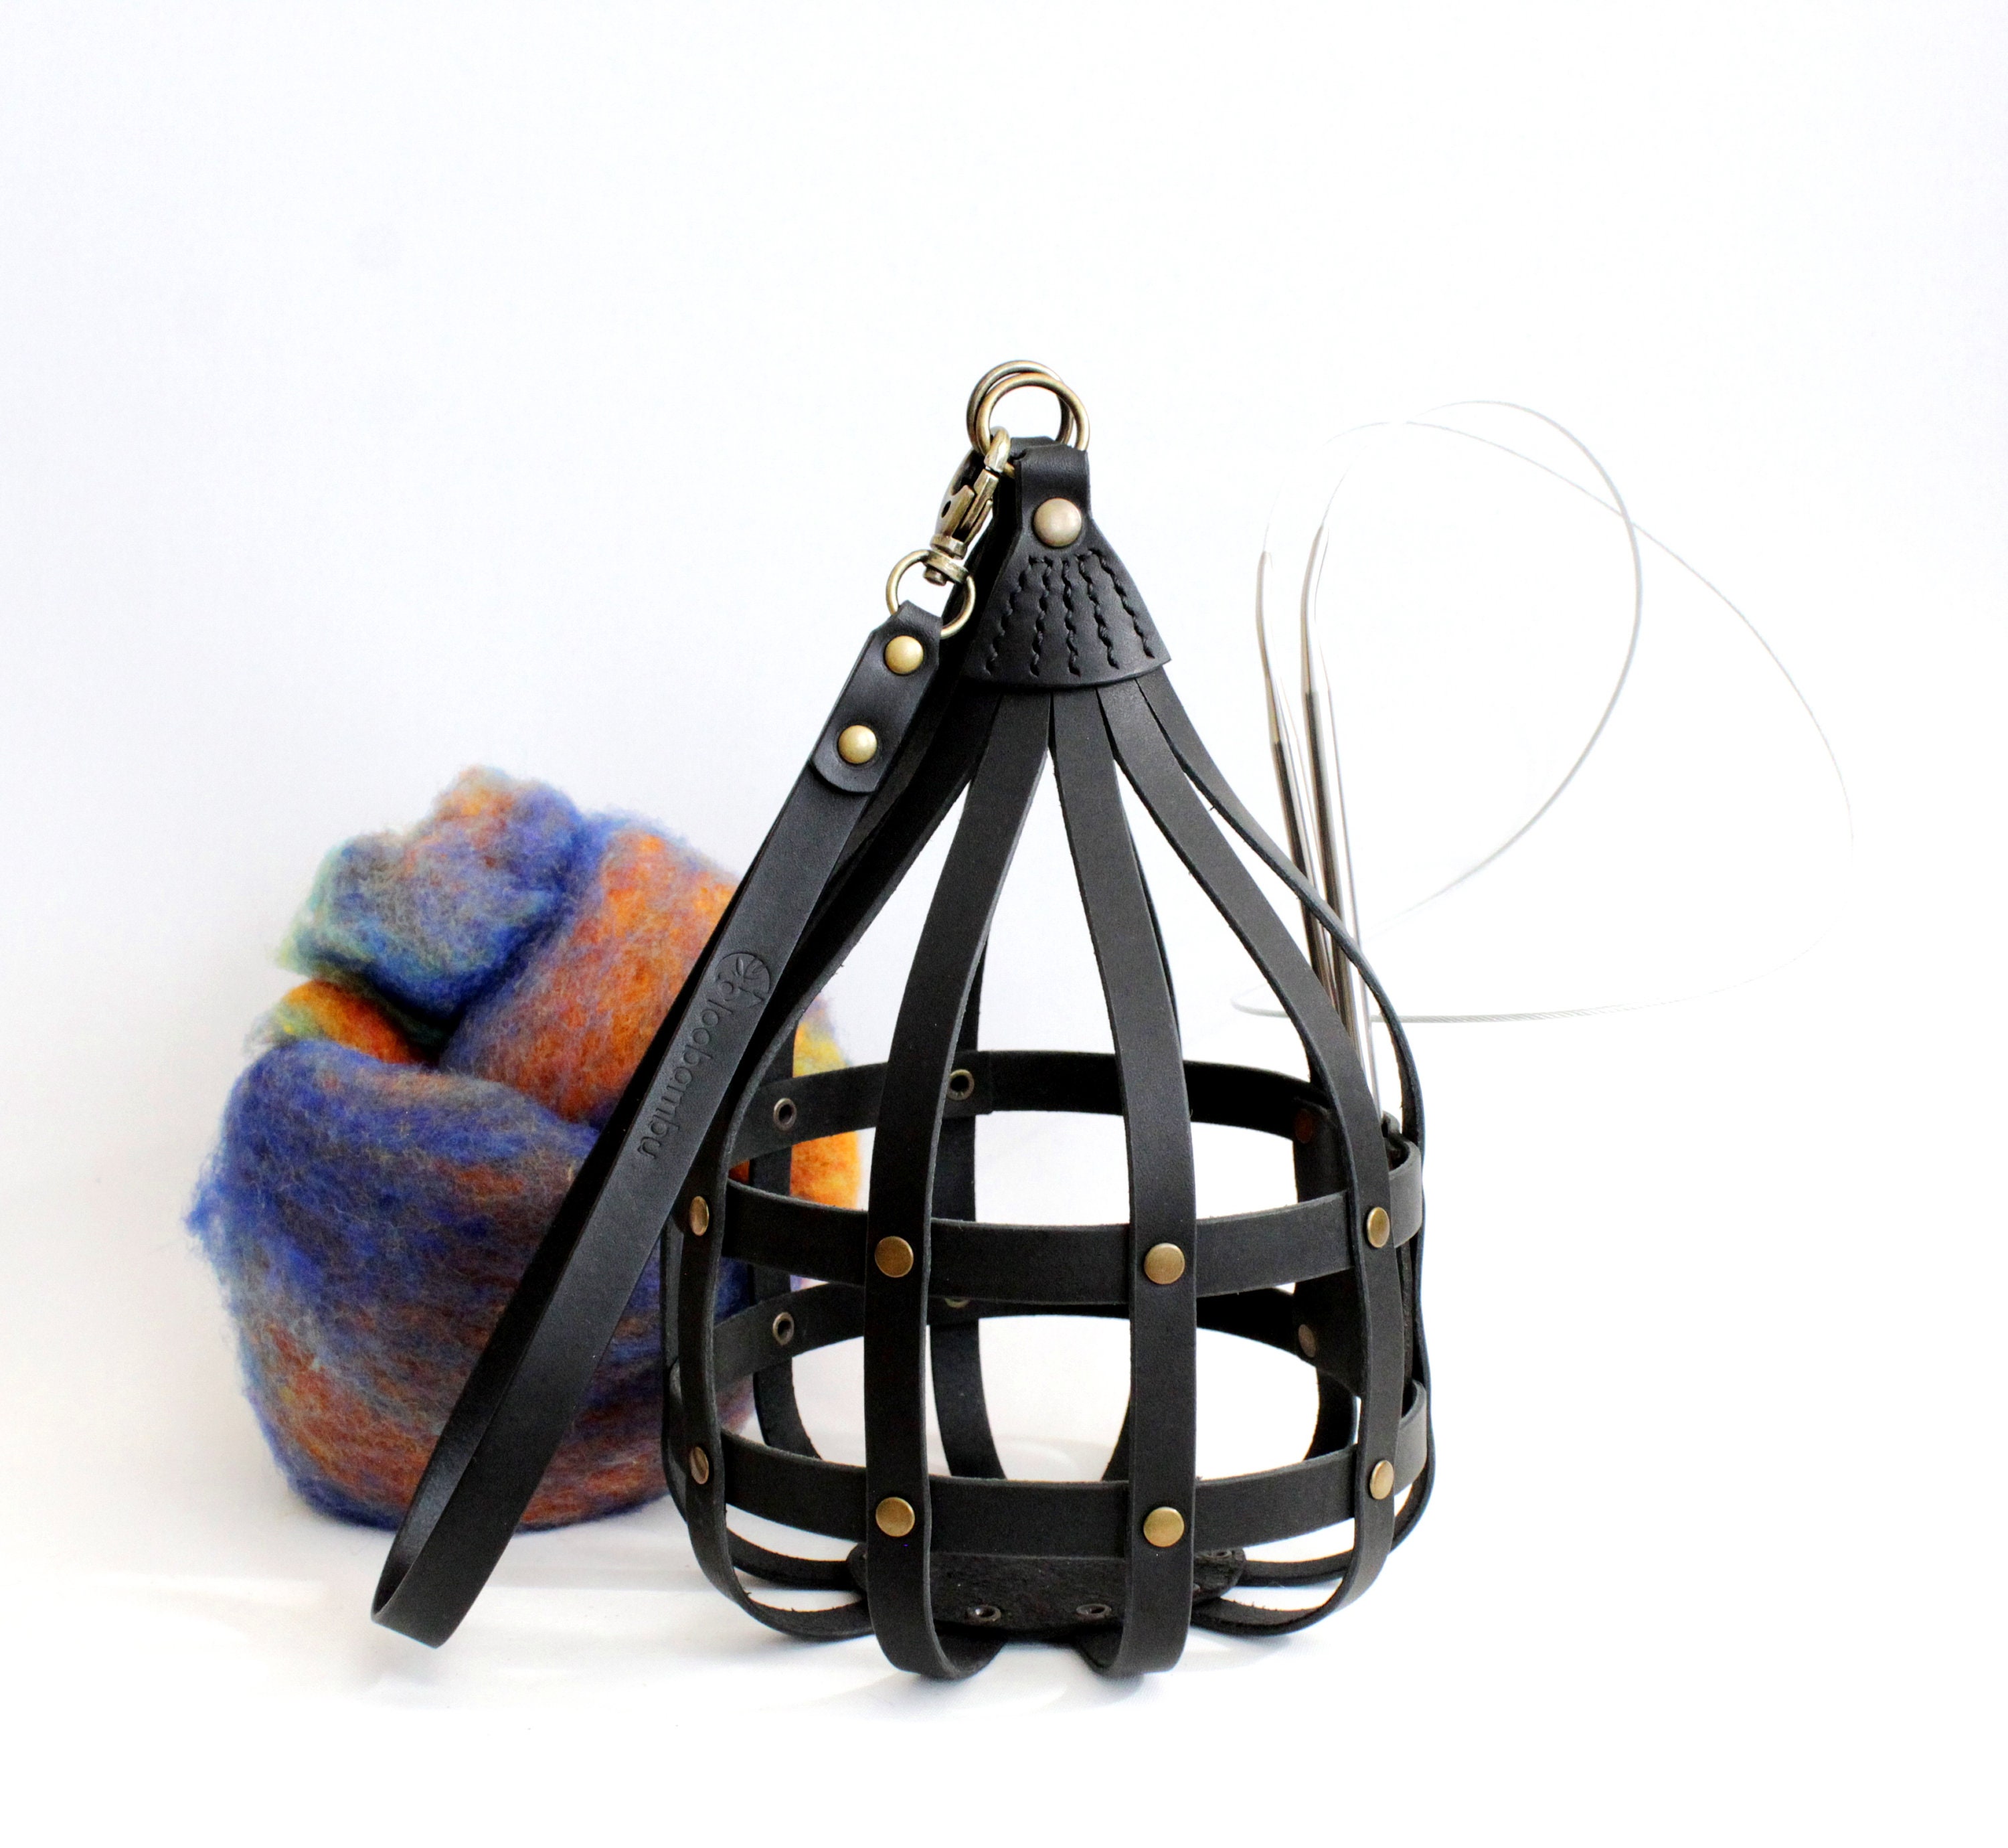 COLORFUL SPACE with Leather Wrist Strap Wrist Yarn Holder Wood